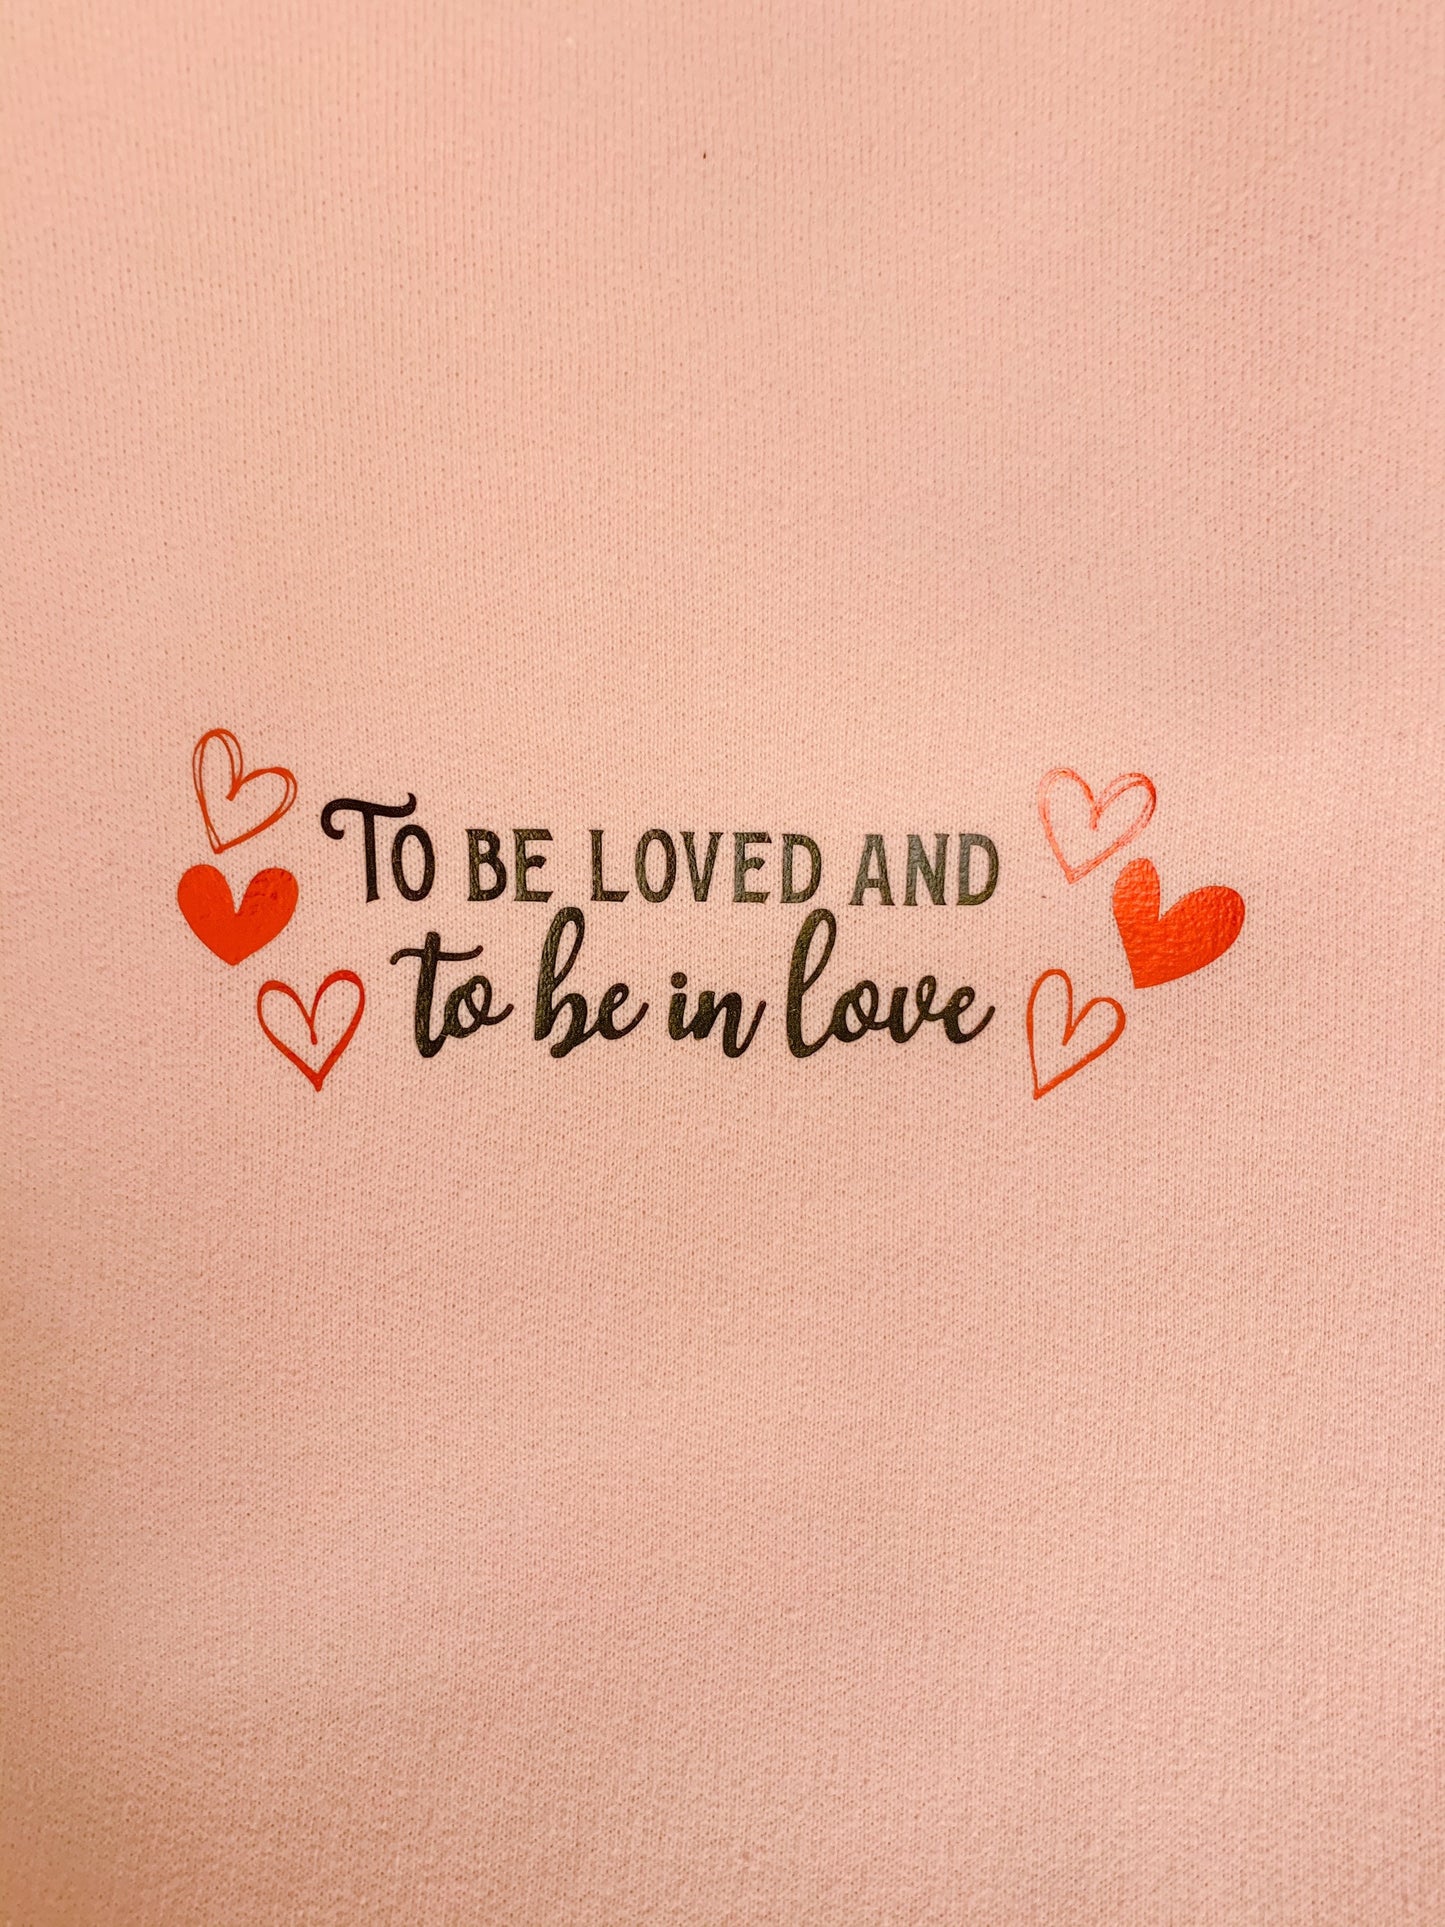 To Be Love, and To Be Loved - 18 || Crewneck Sweatshirt, Hoodie, Tee Shirt, and Long Sleeve